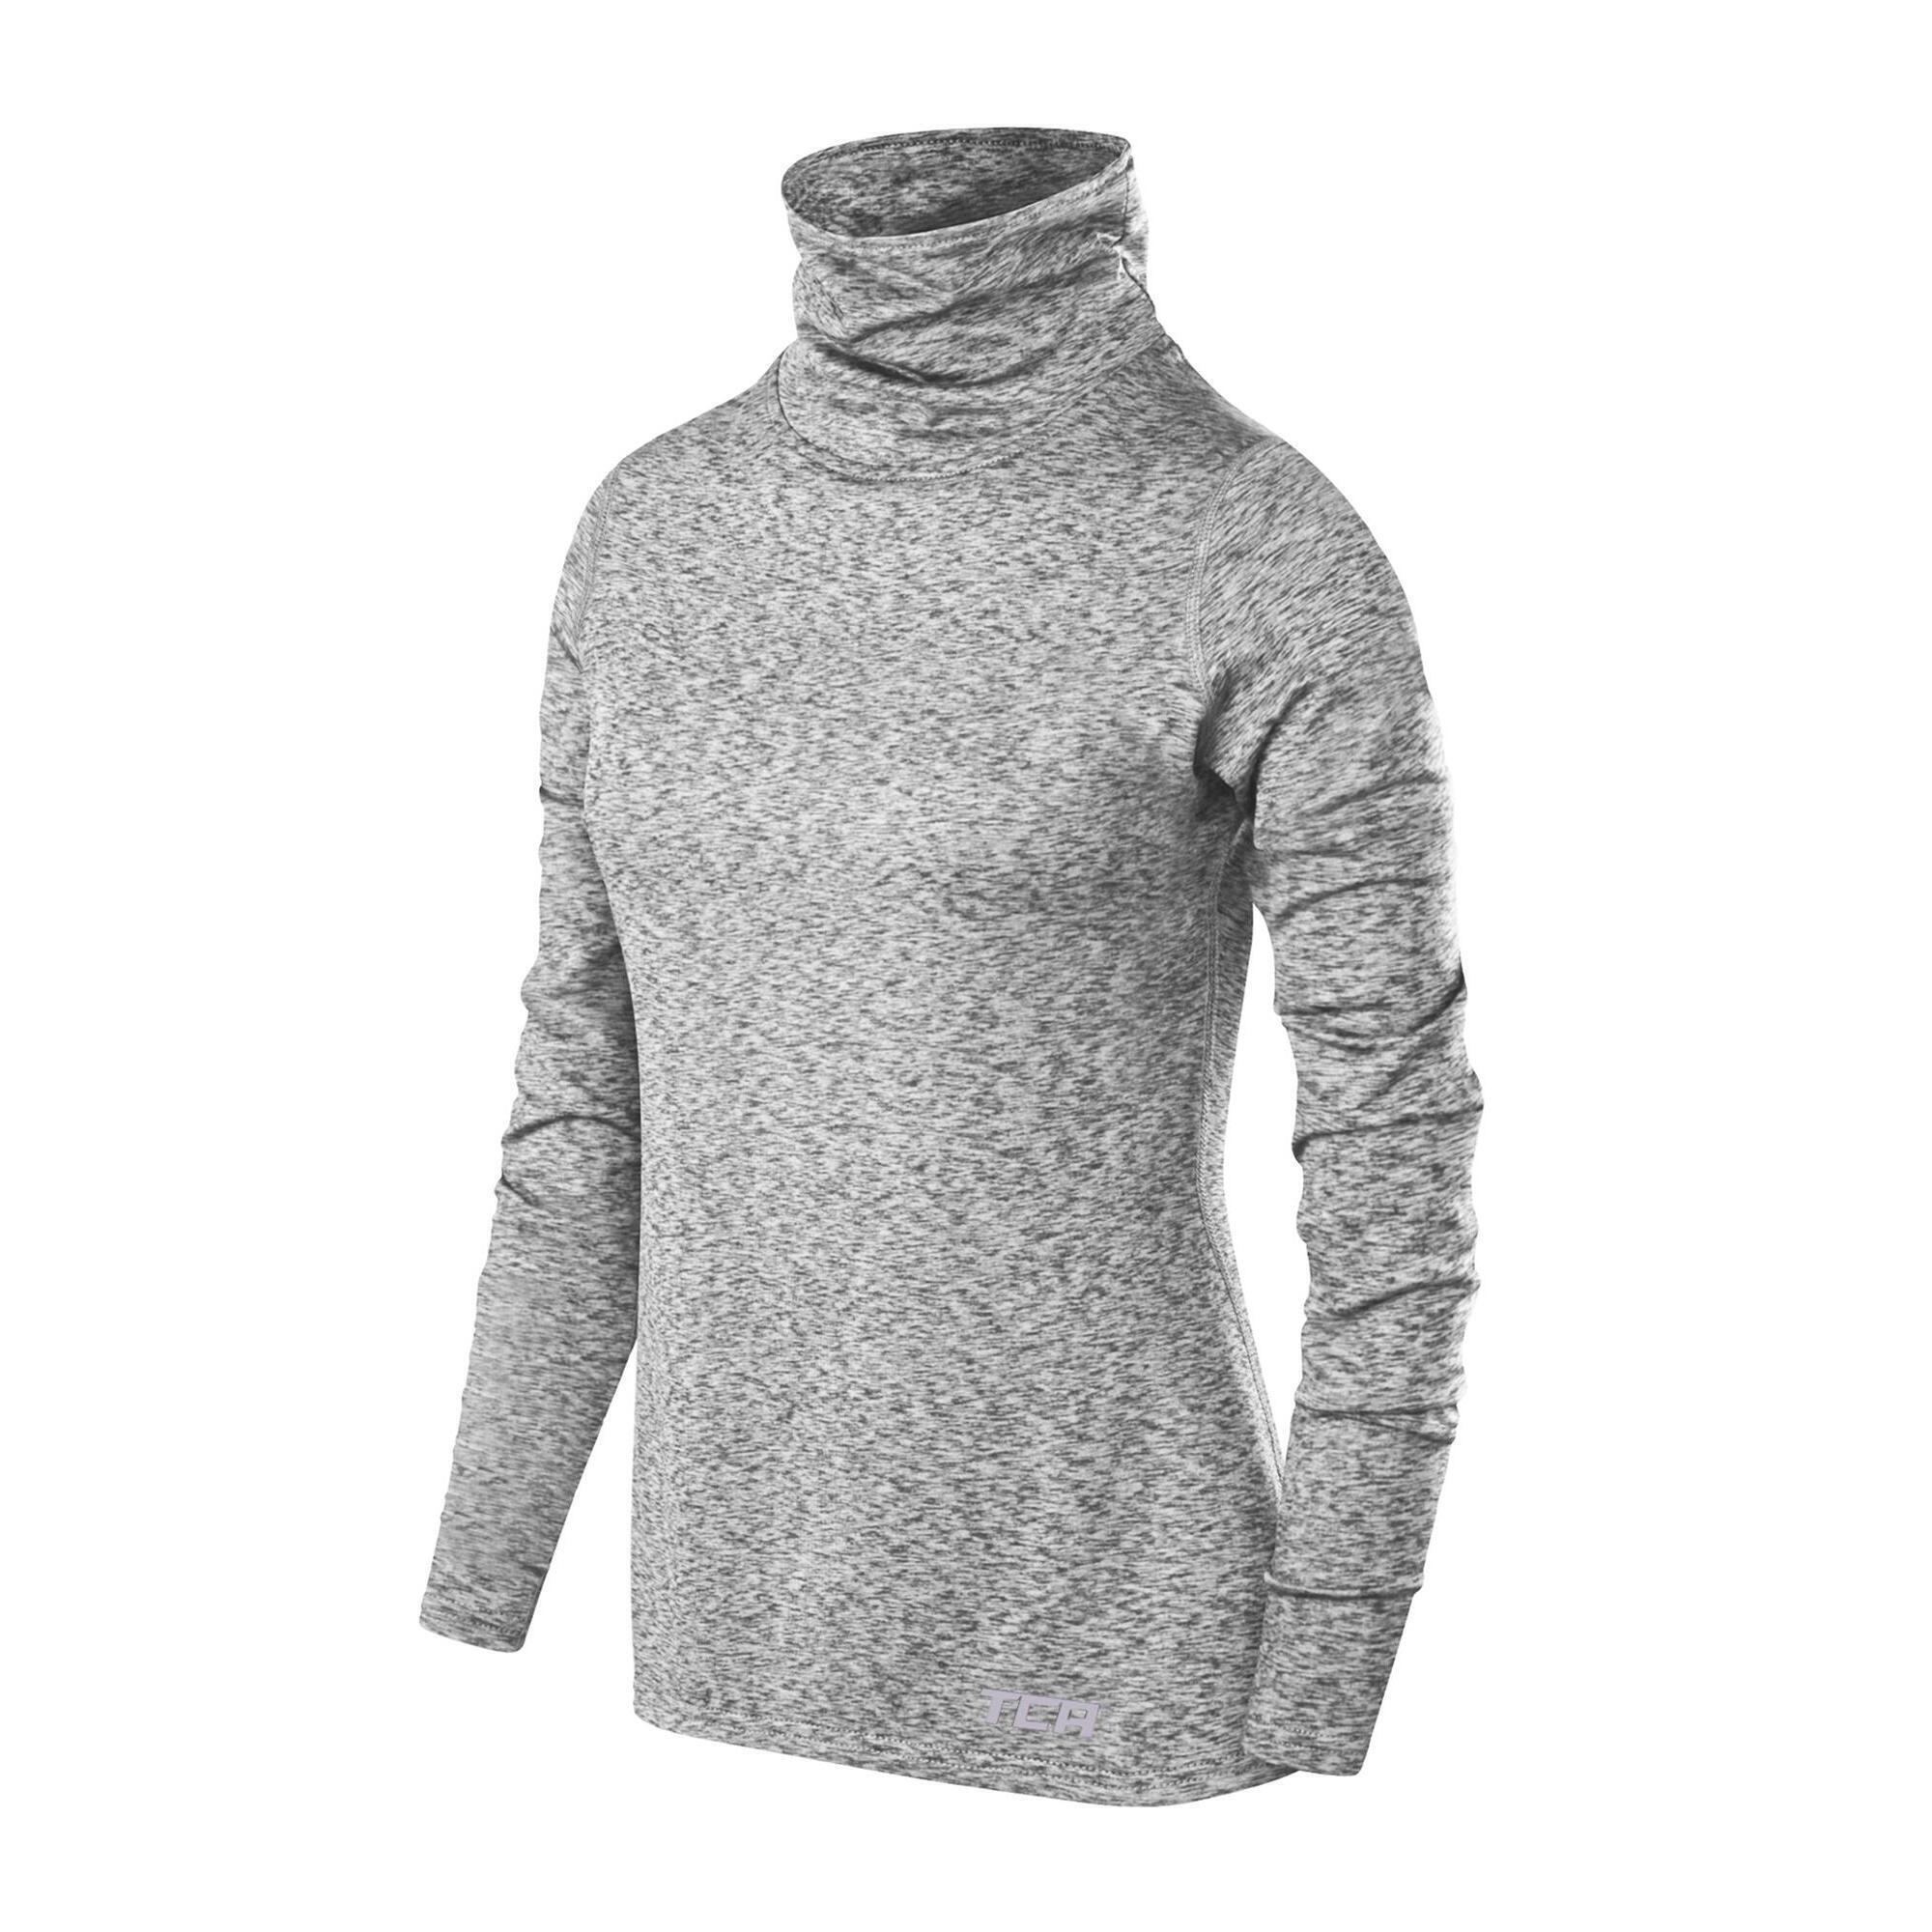 Girls' Thermal Funnel Neck Top - Quiet Shade Marl 1/5